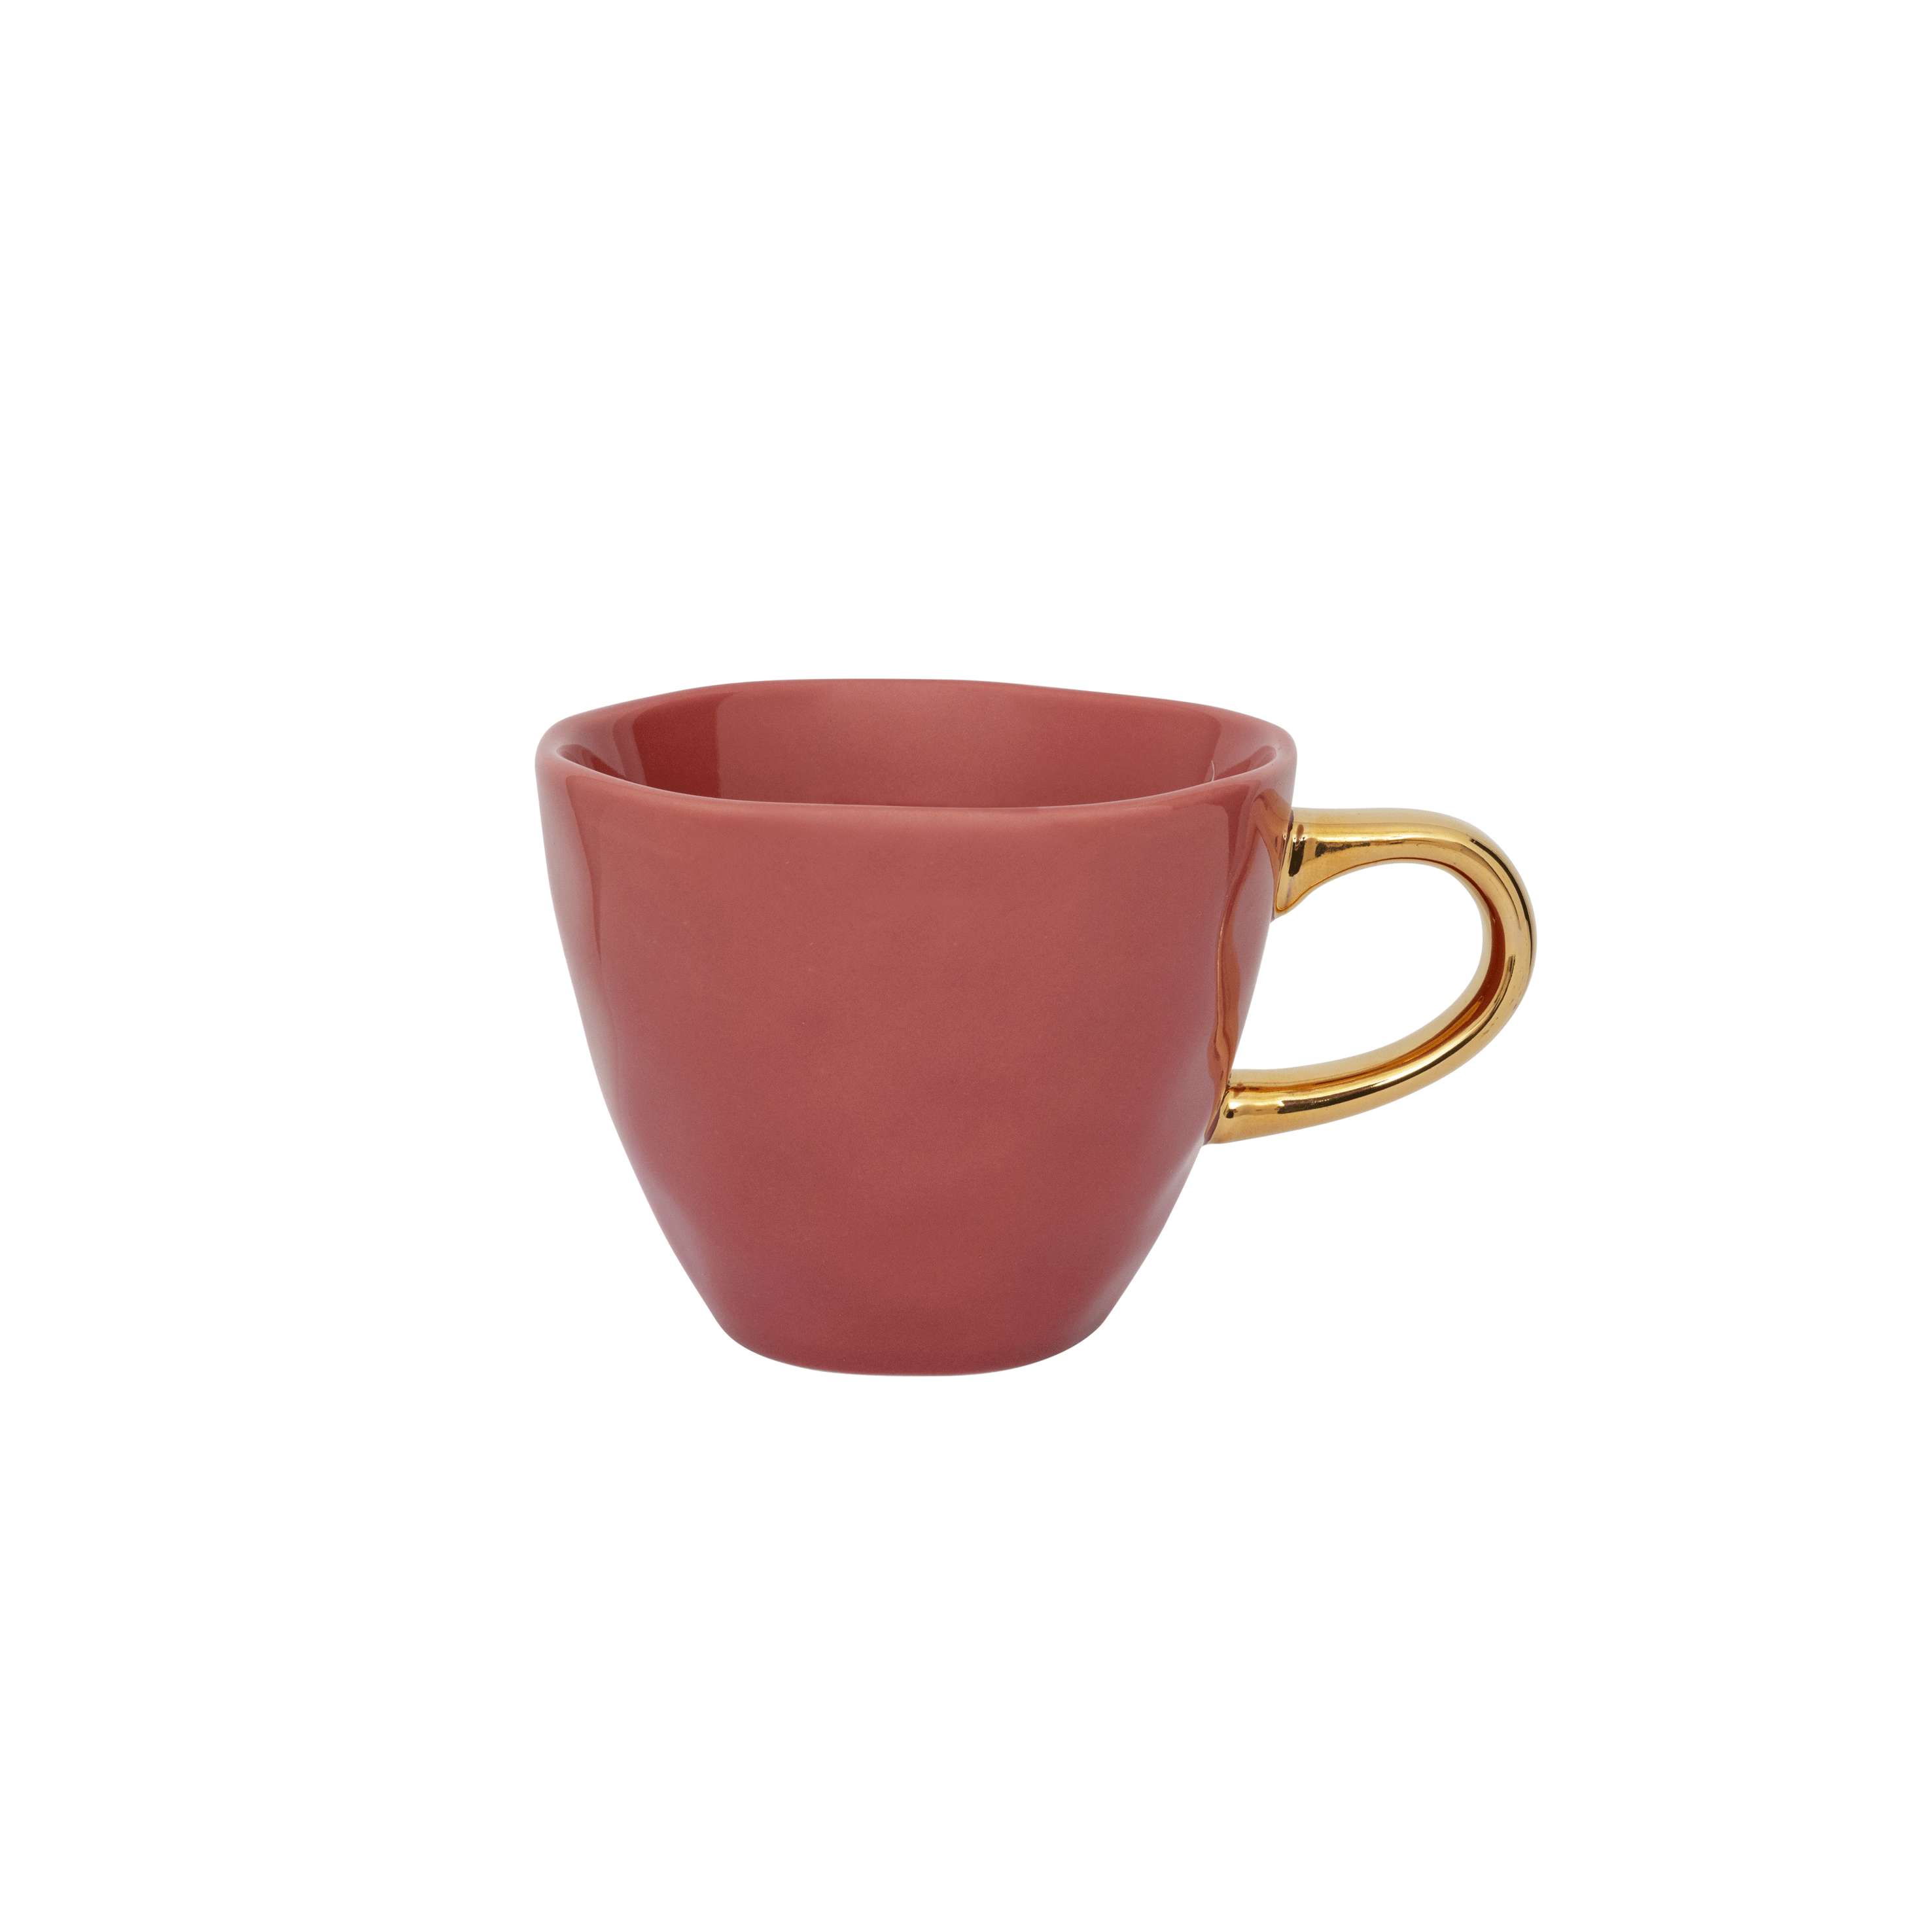 Unc Good Morning Cup Mini Brandied Apricot Gift